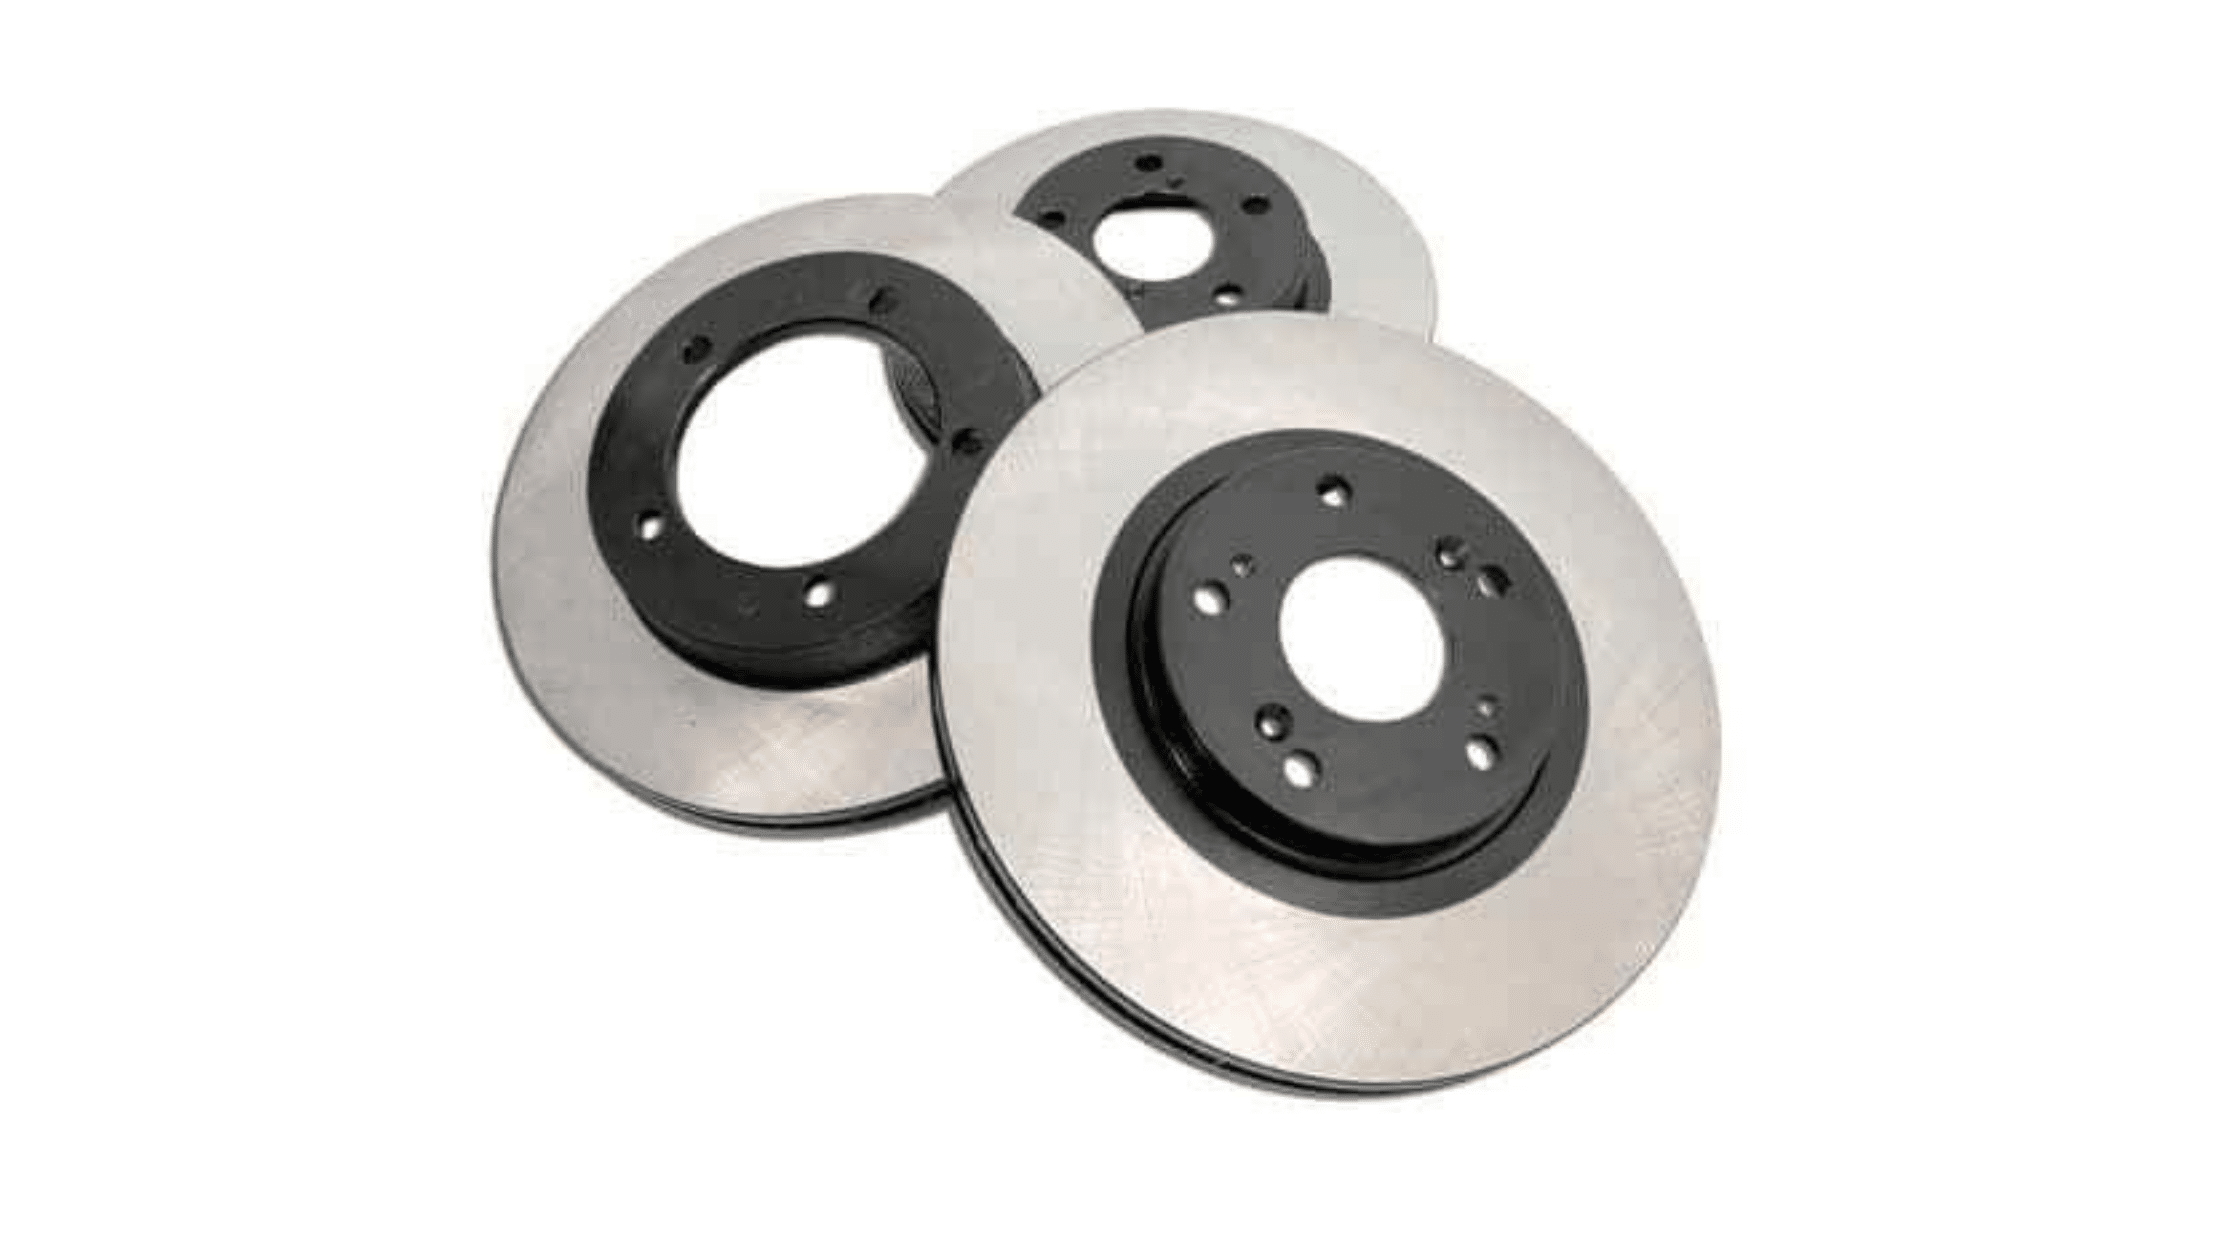 First Brands Group intros new Centric rotors